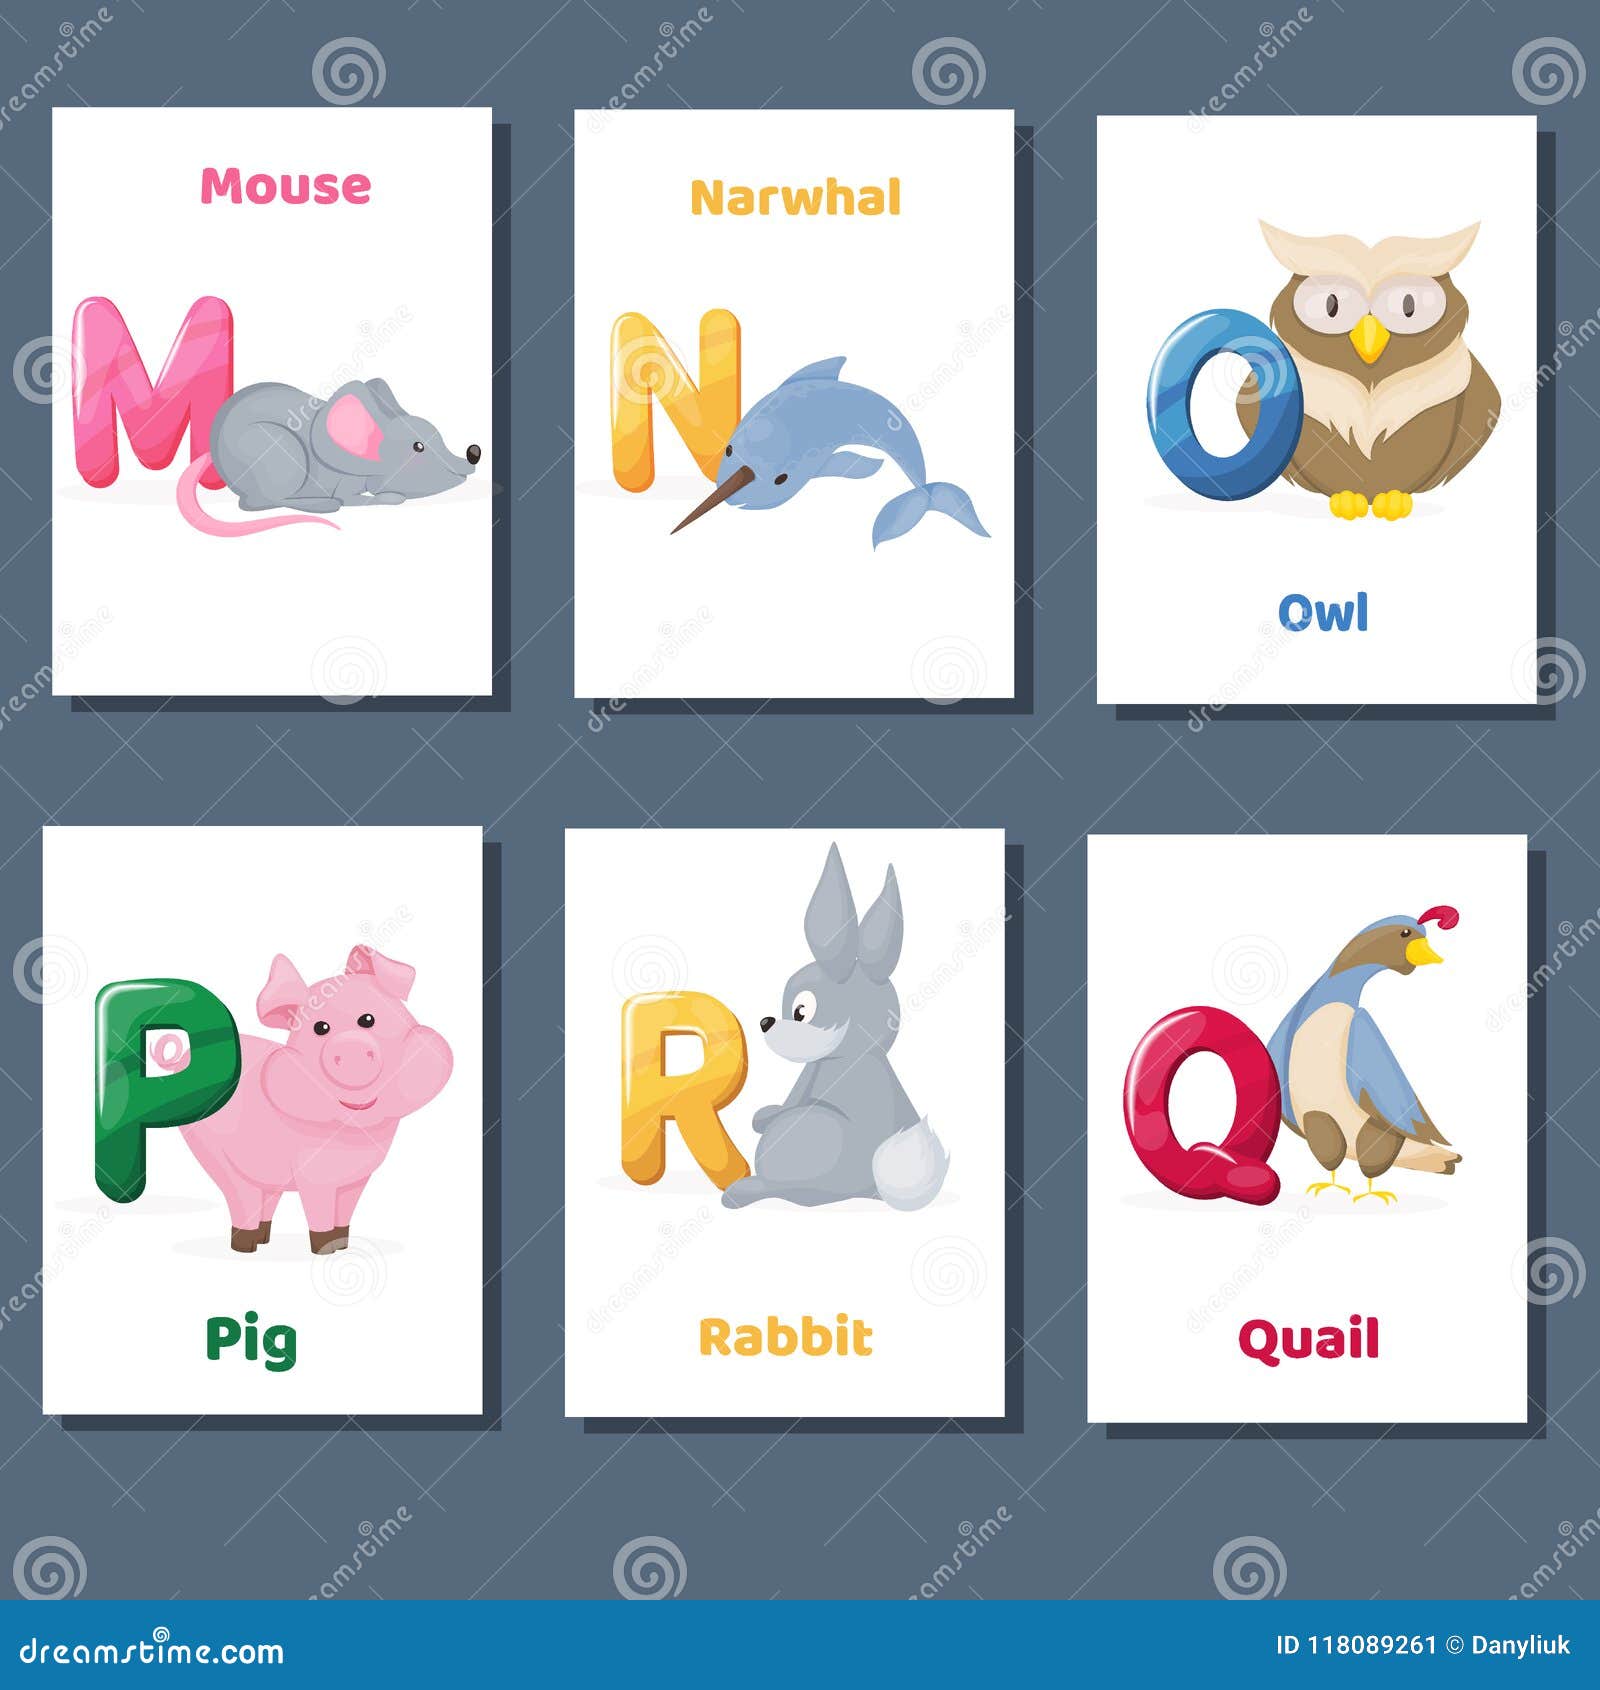 Alphabet Printable Flashcards Vector Collection with Letter M N O P Q R.  Zoo Animals for English Language Education. Stock Vector - Illustration of  learn, children: 118089261